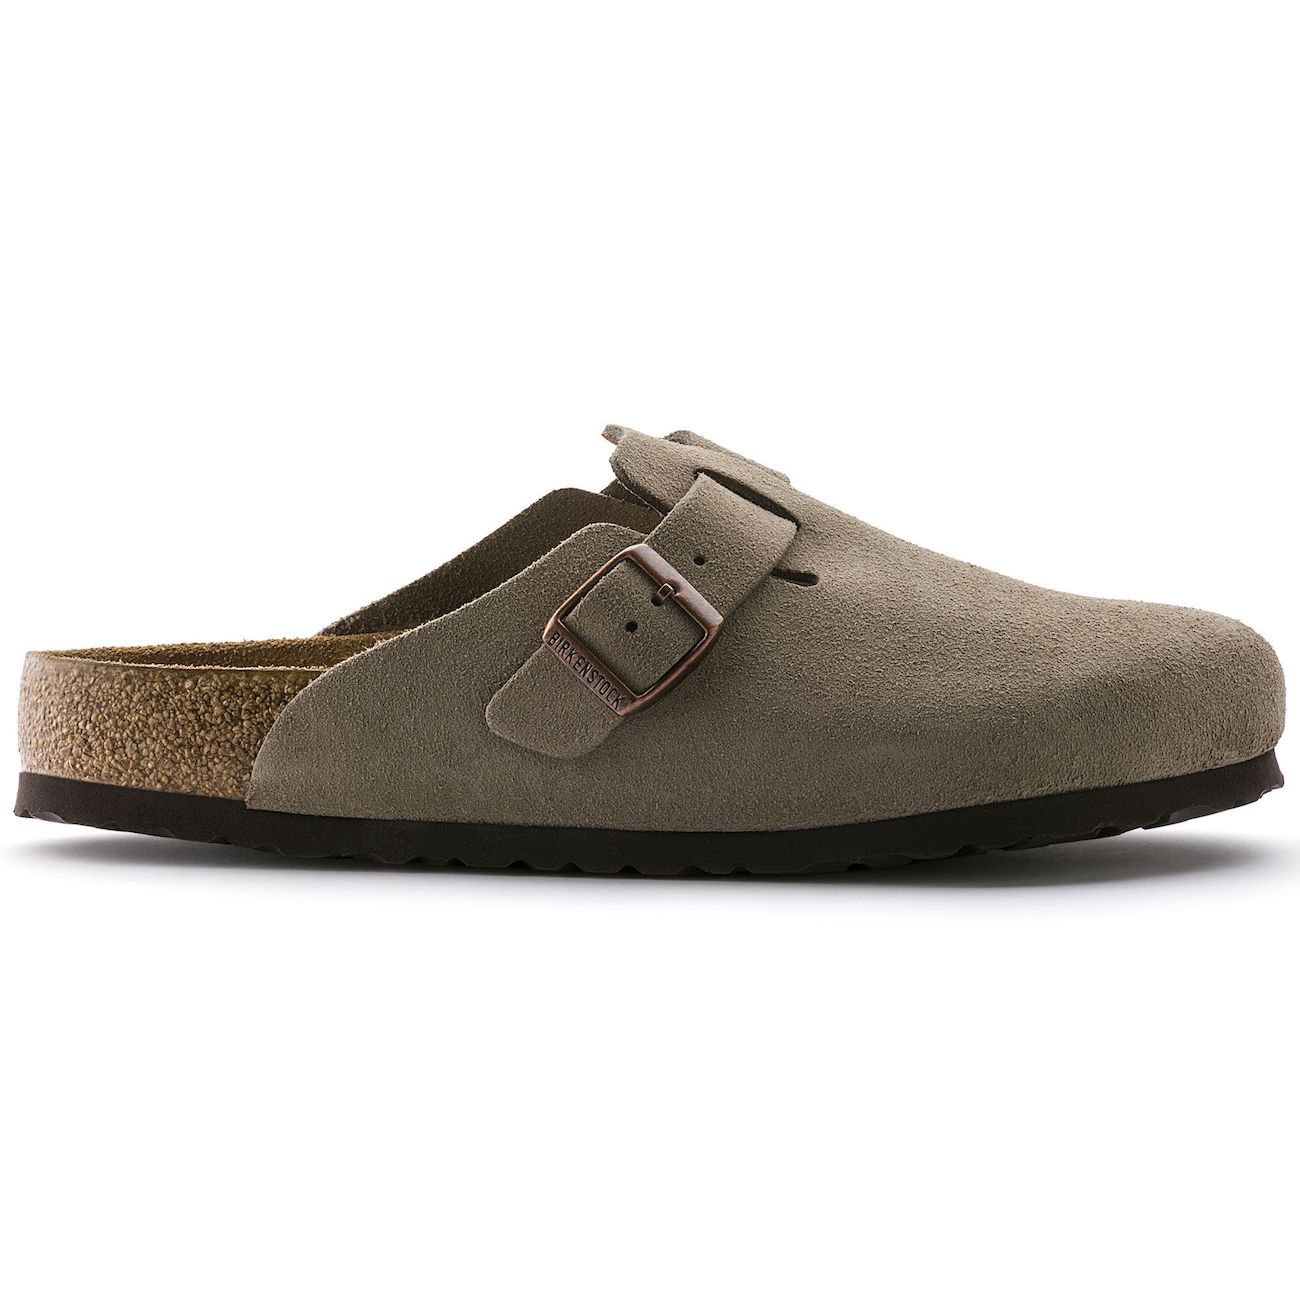 Birkenstock Classic, Boston, Narrow Fit, Suede Leather, Taupe Clogs Birkenstock Classic Taupe 38 